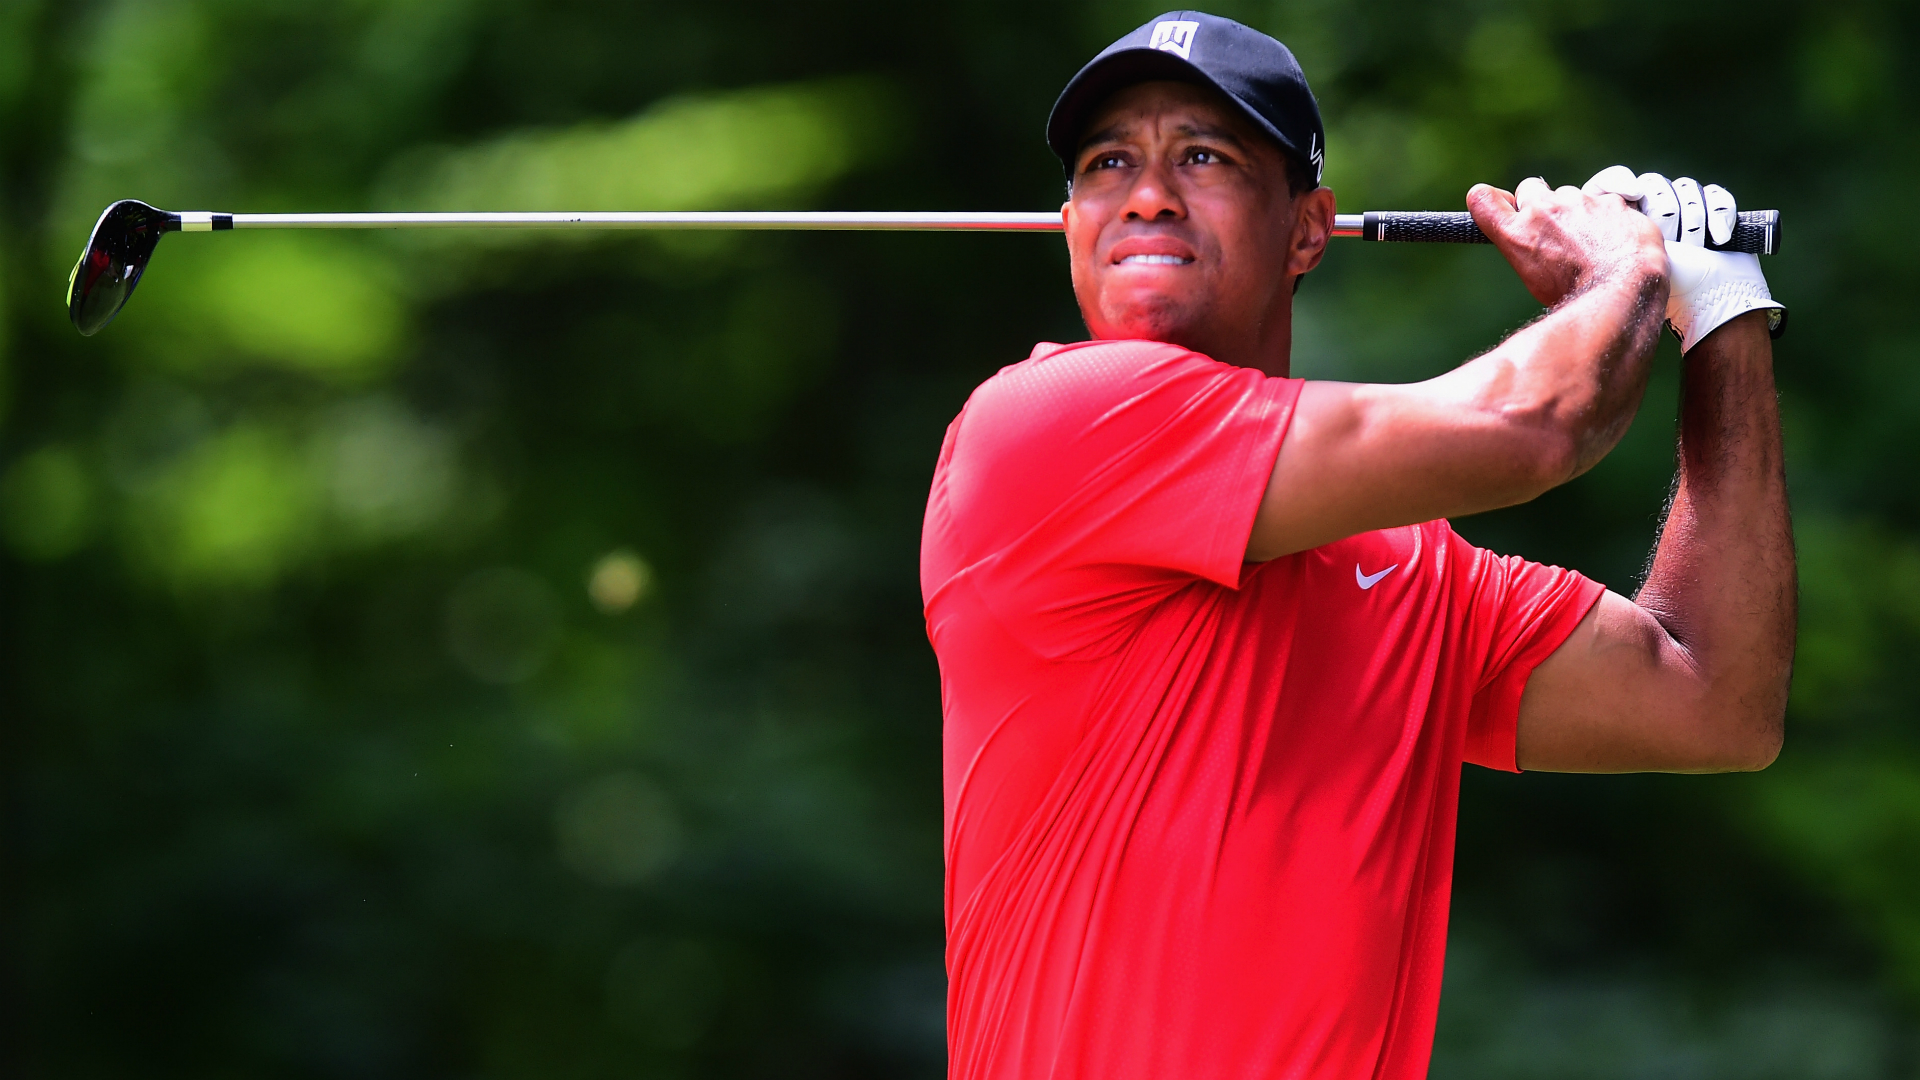 Tiger Woods Reportedly Entering DUI Offender Program, Longshot to Win Another PGA Tour Event